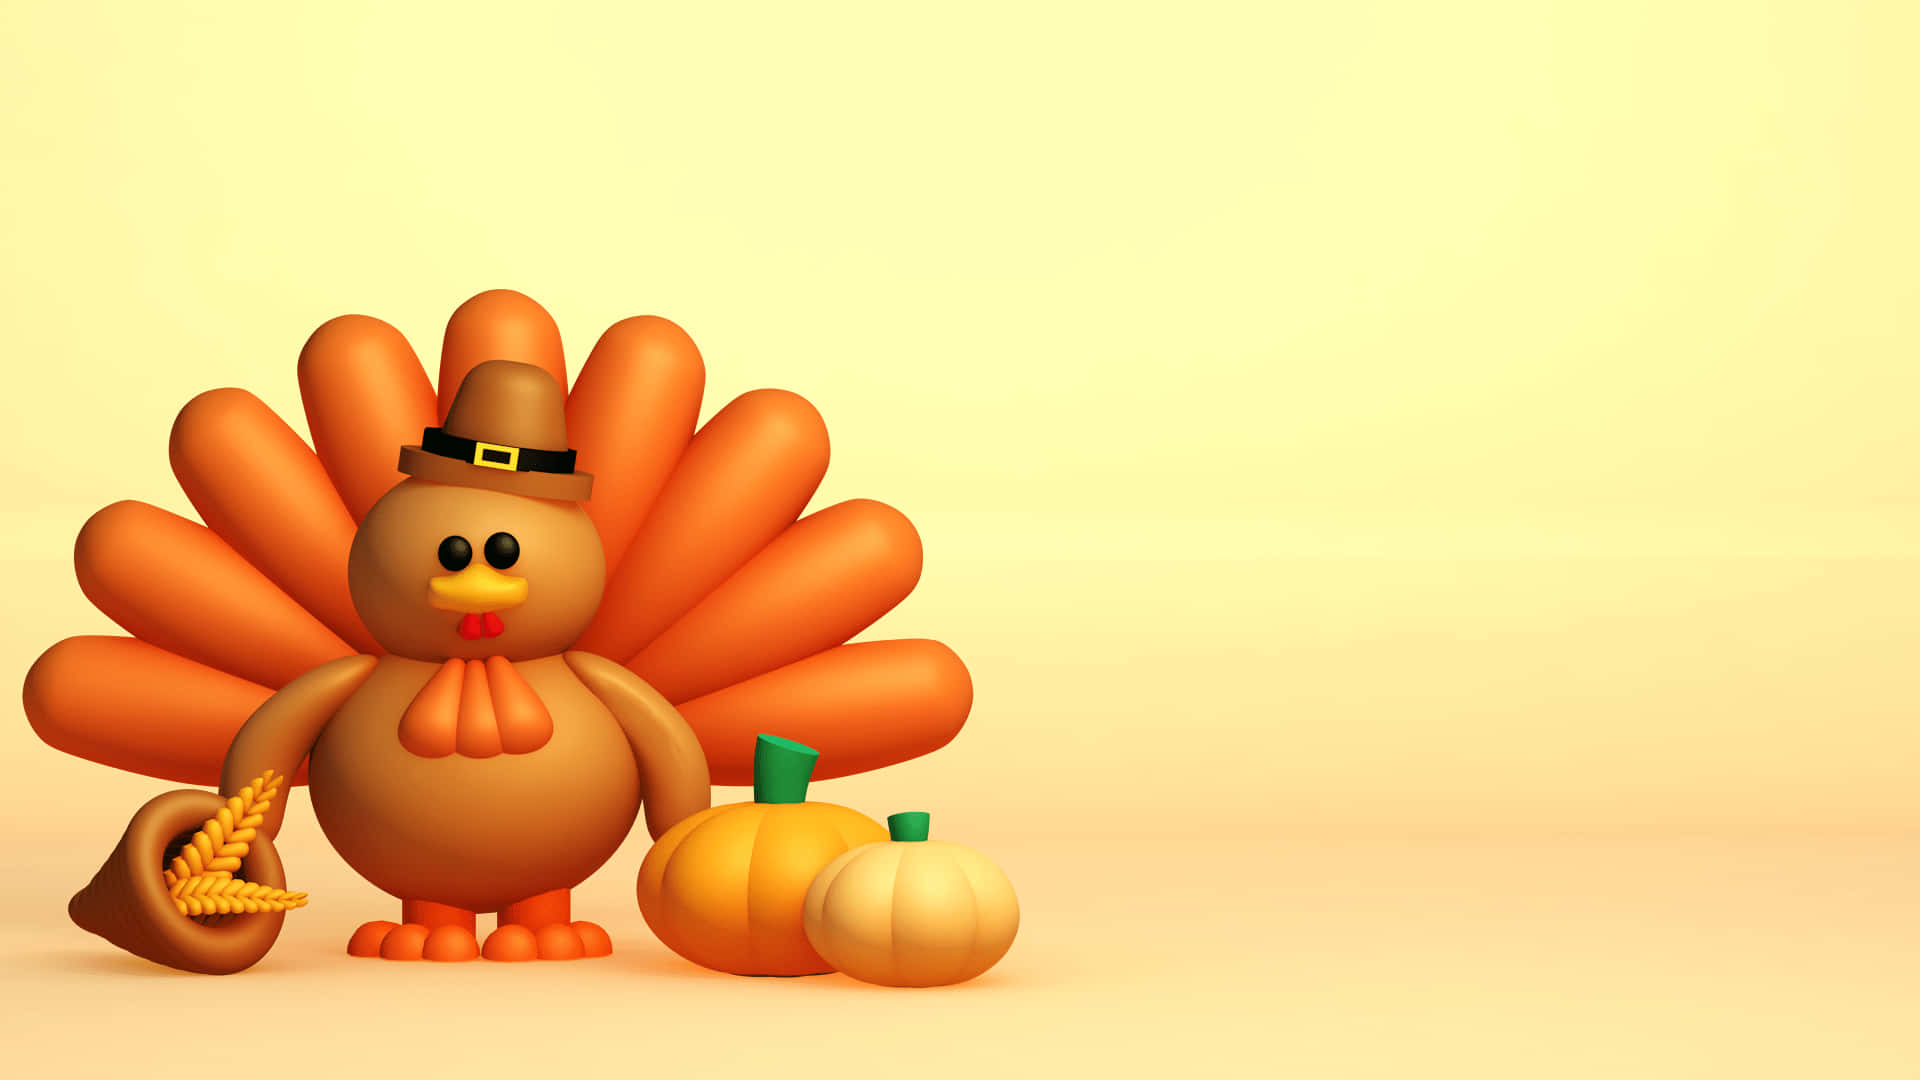 A silly turkey wears a pair of stage glasses